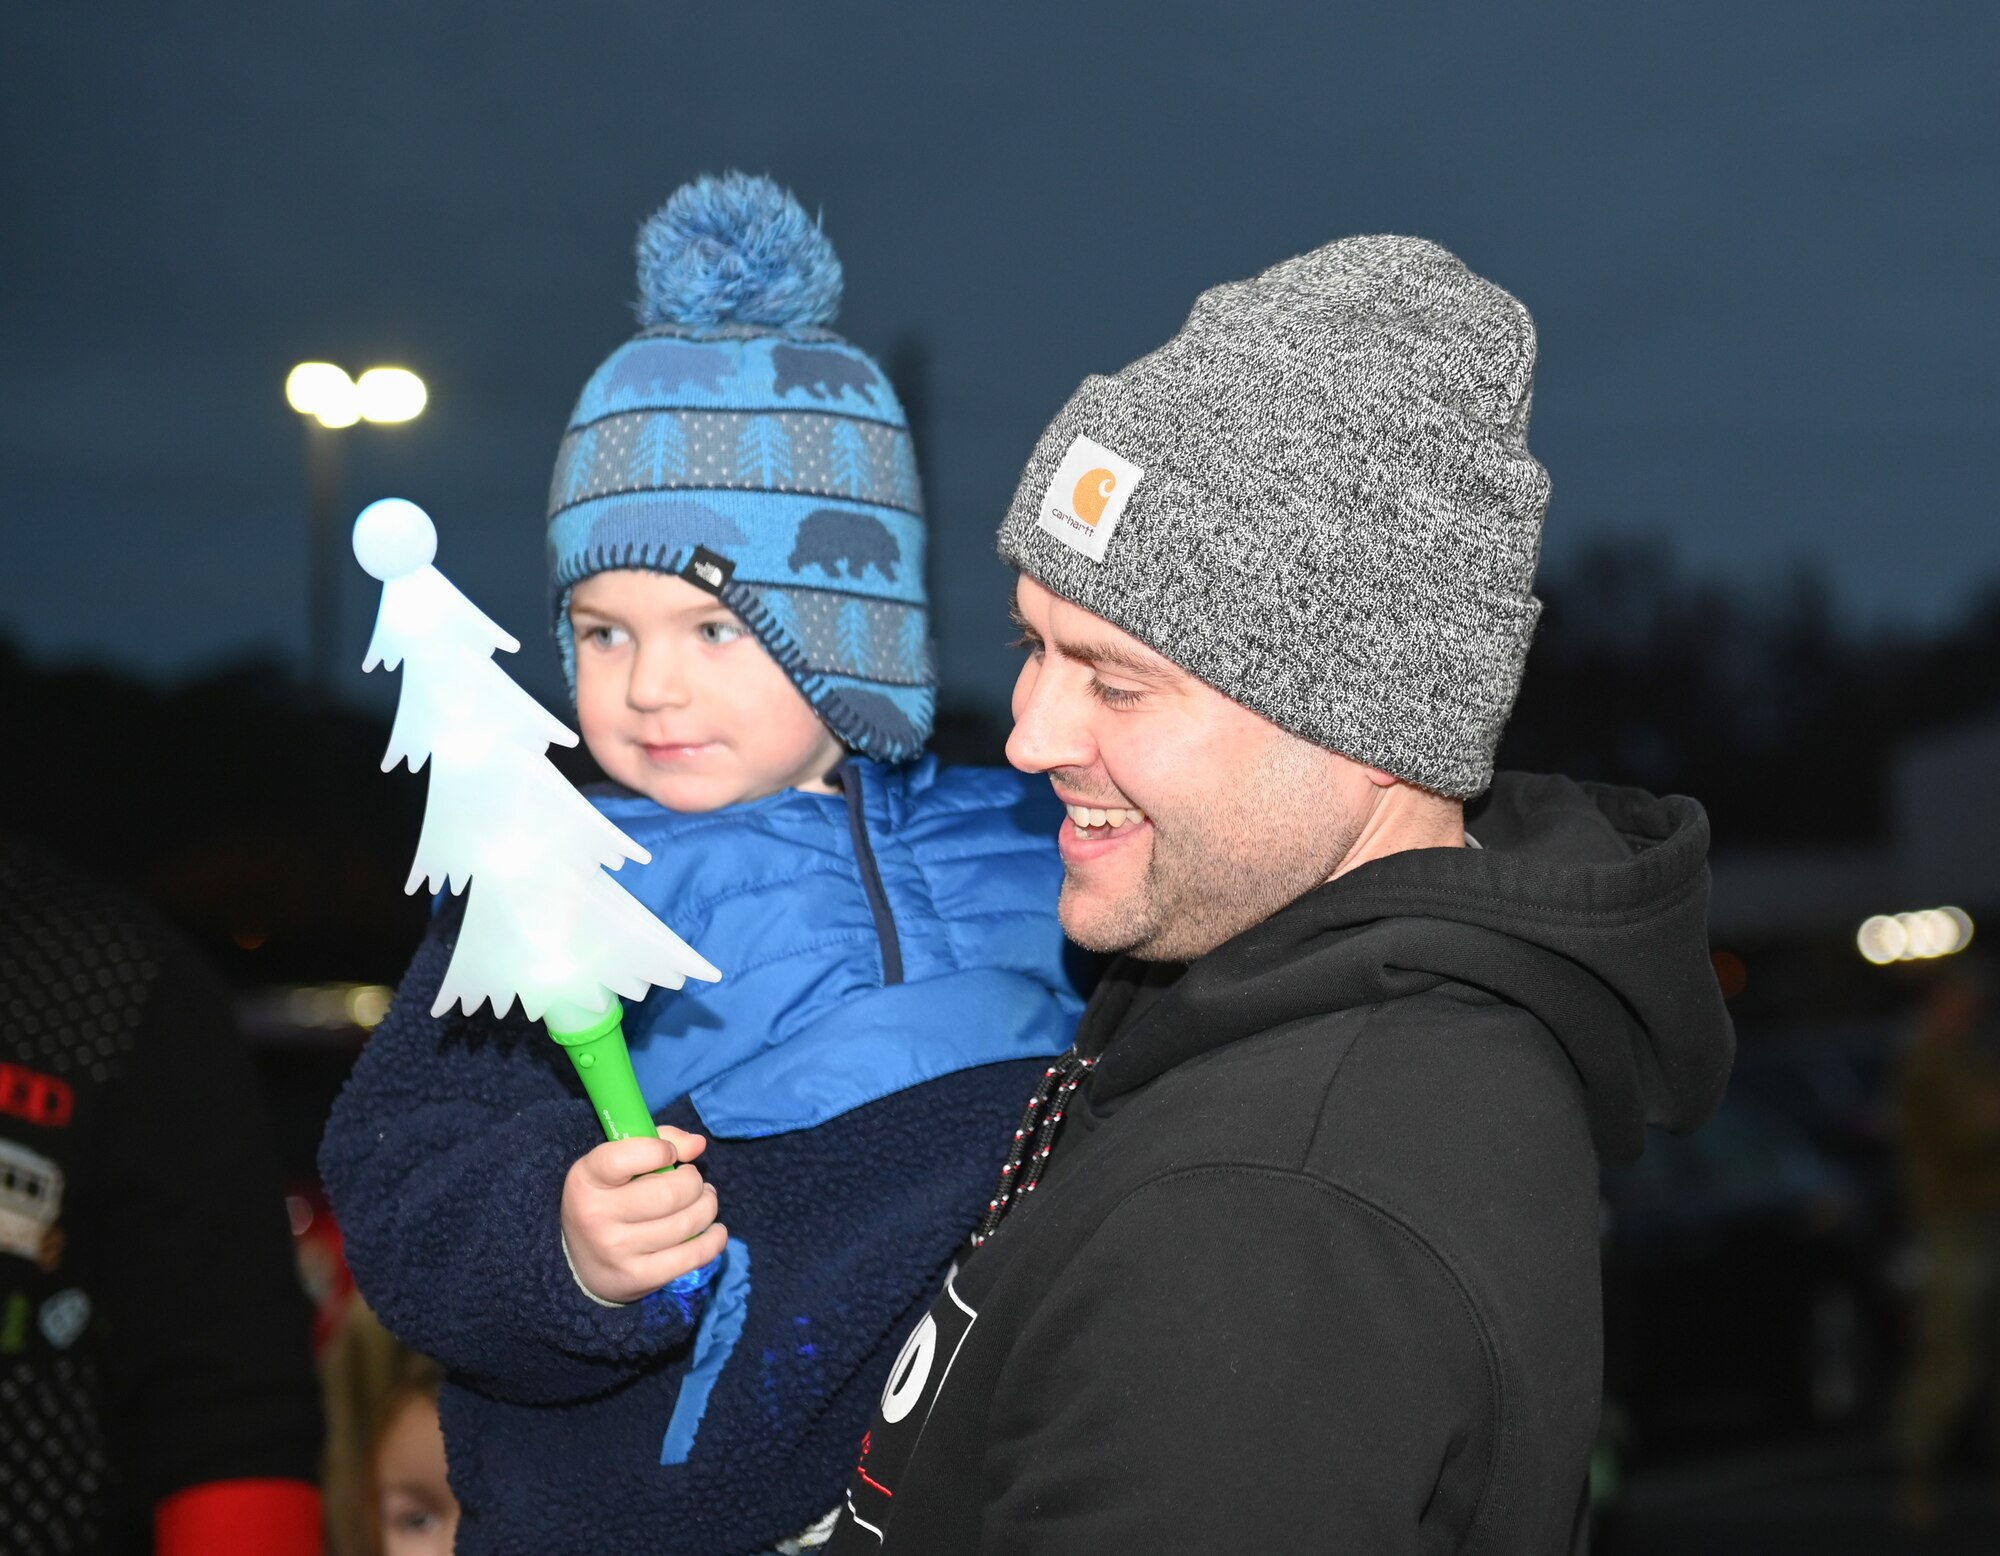 A father and son enjoy the festivities during the Holiday Village and vendor fair at Seymour Johnson Air Force Base, North Carolina, Dec. 5, 2022. The event included entertainment for children, music performances, Santa and Mrs. Claus and vendor booths. (U.S. Air Force photo by Airman 1st Class Rebecca Sirimarco-Lang)